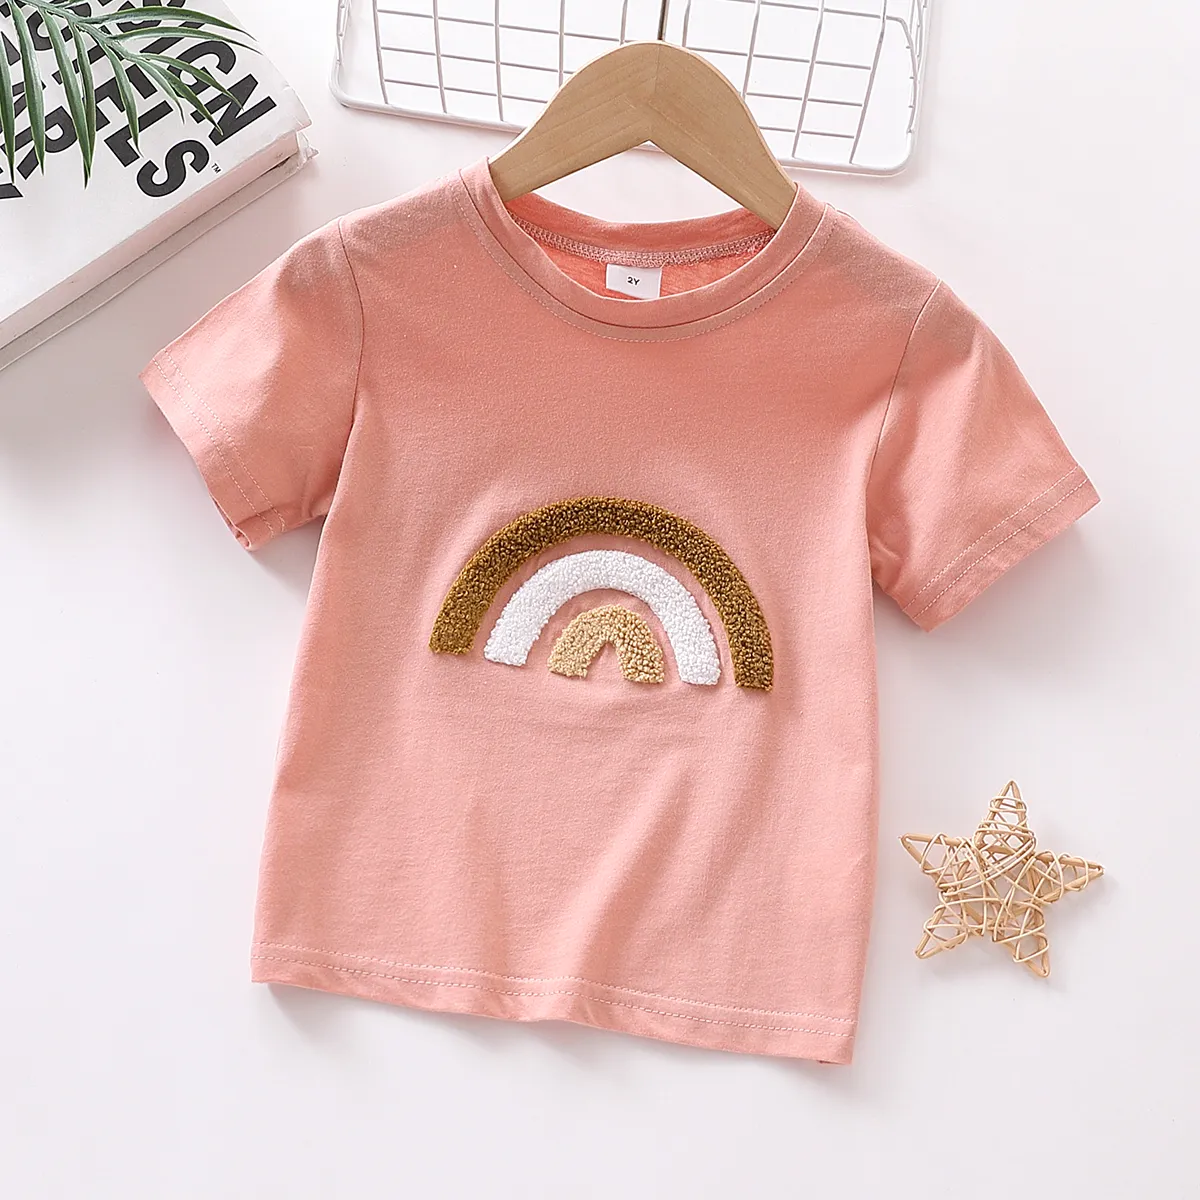 Toddler Girl 100% Cotton Rainbow Embroidered Short-sleeve Tee Pink big image 1